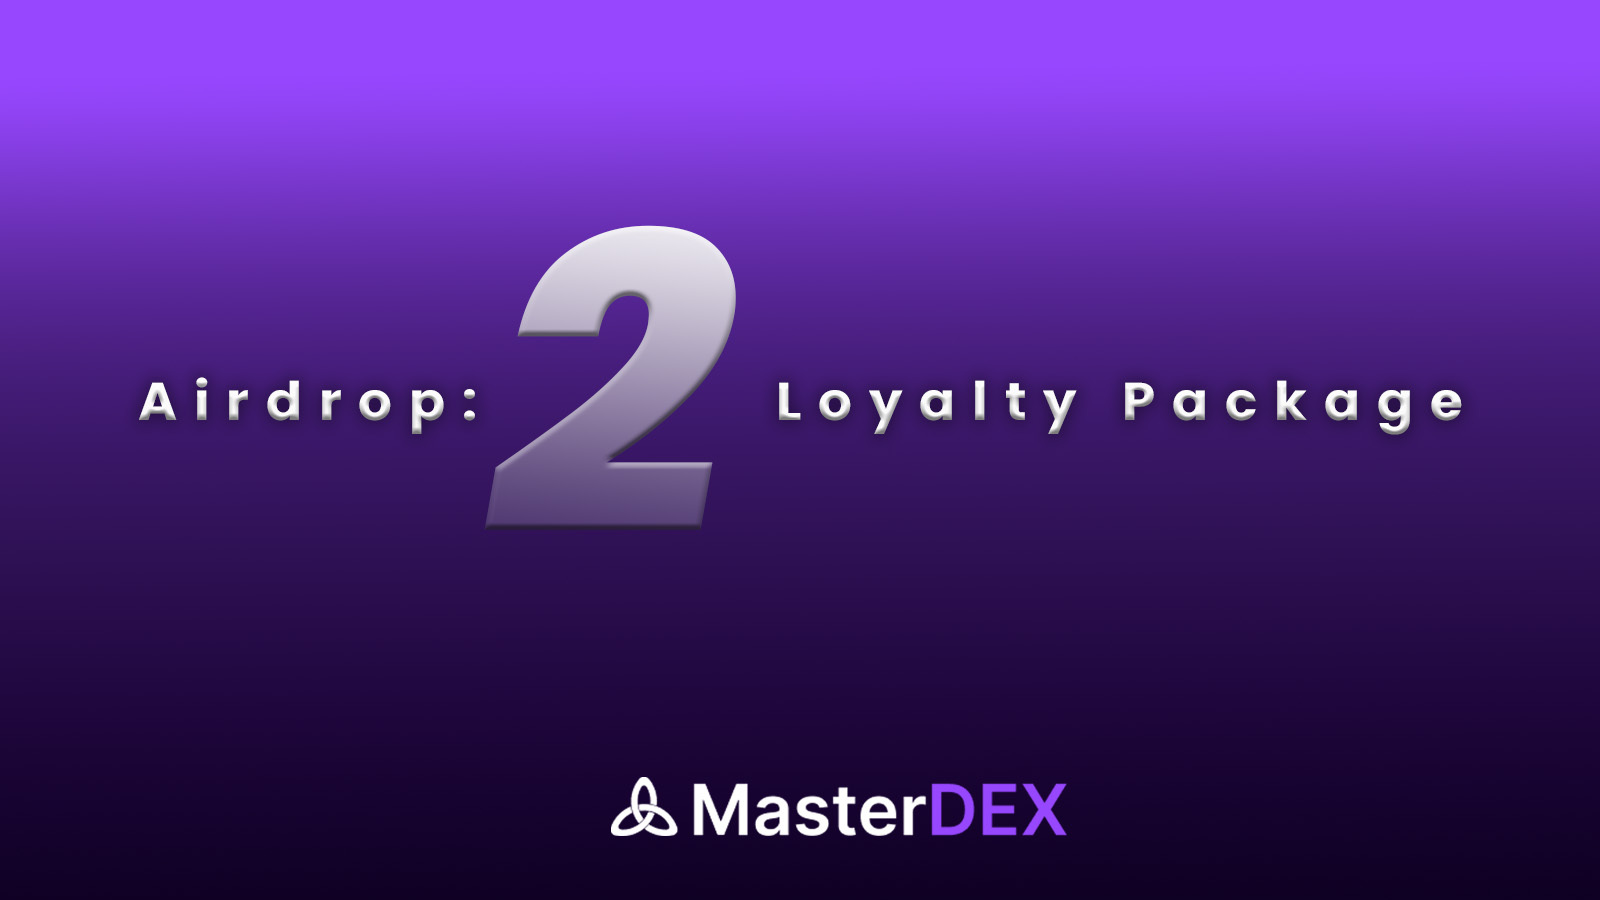 2nd Loyalty Package